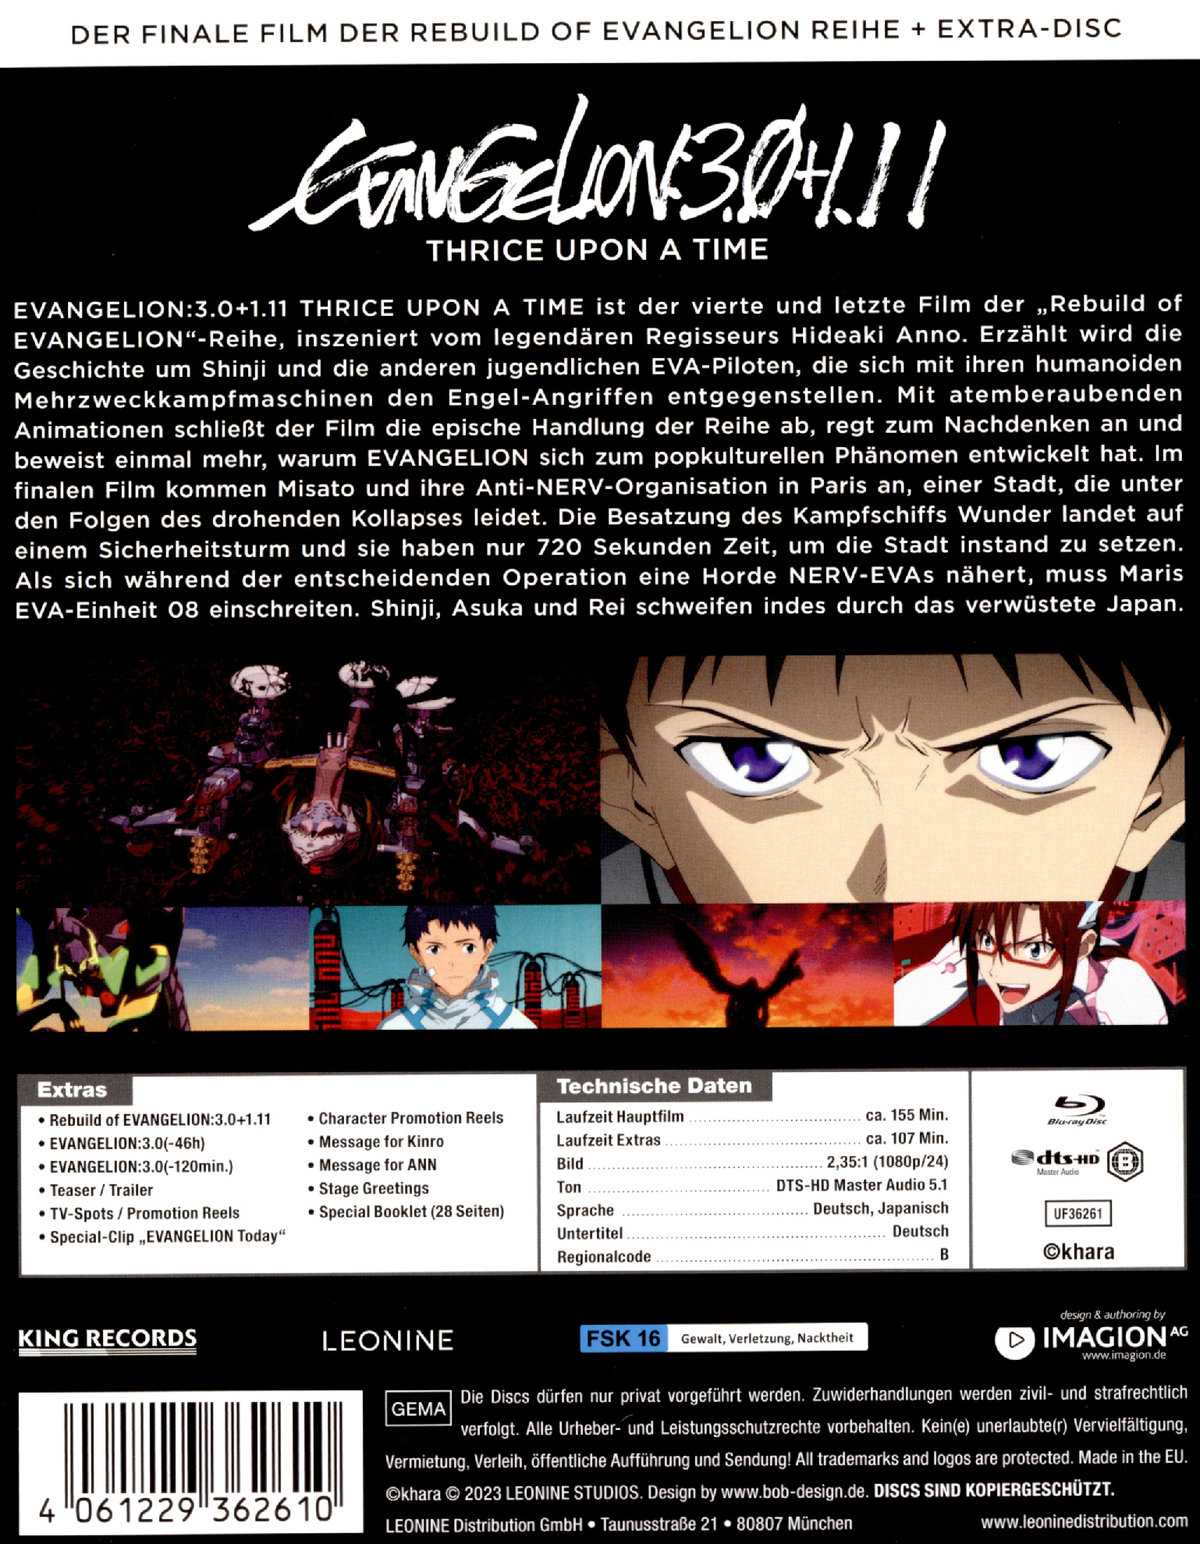 Evangelion: 3.0+1.11 Thrice Upon a Time - Uncut Mediabook Edition (blu-ray)